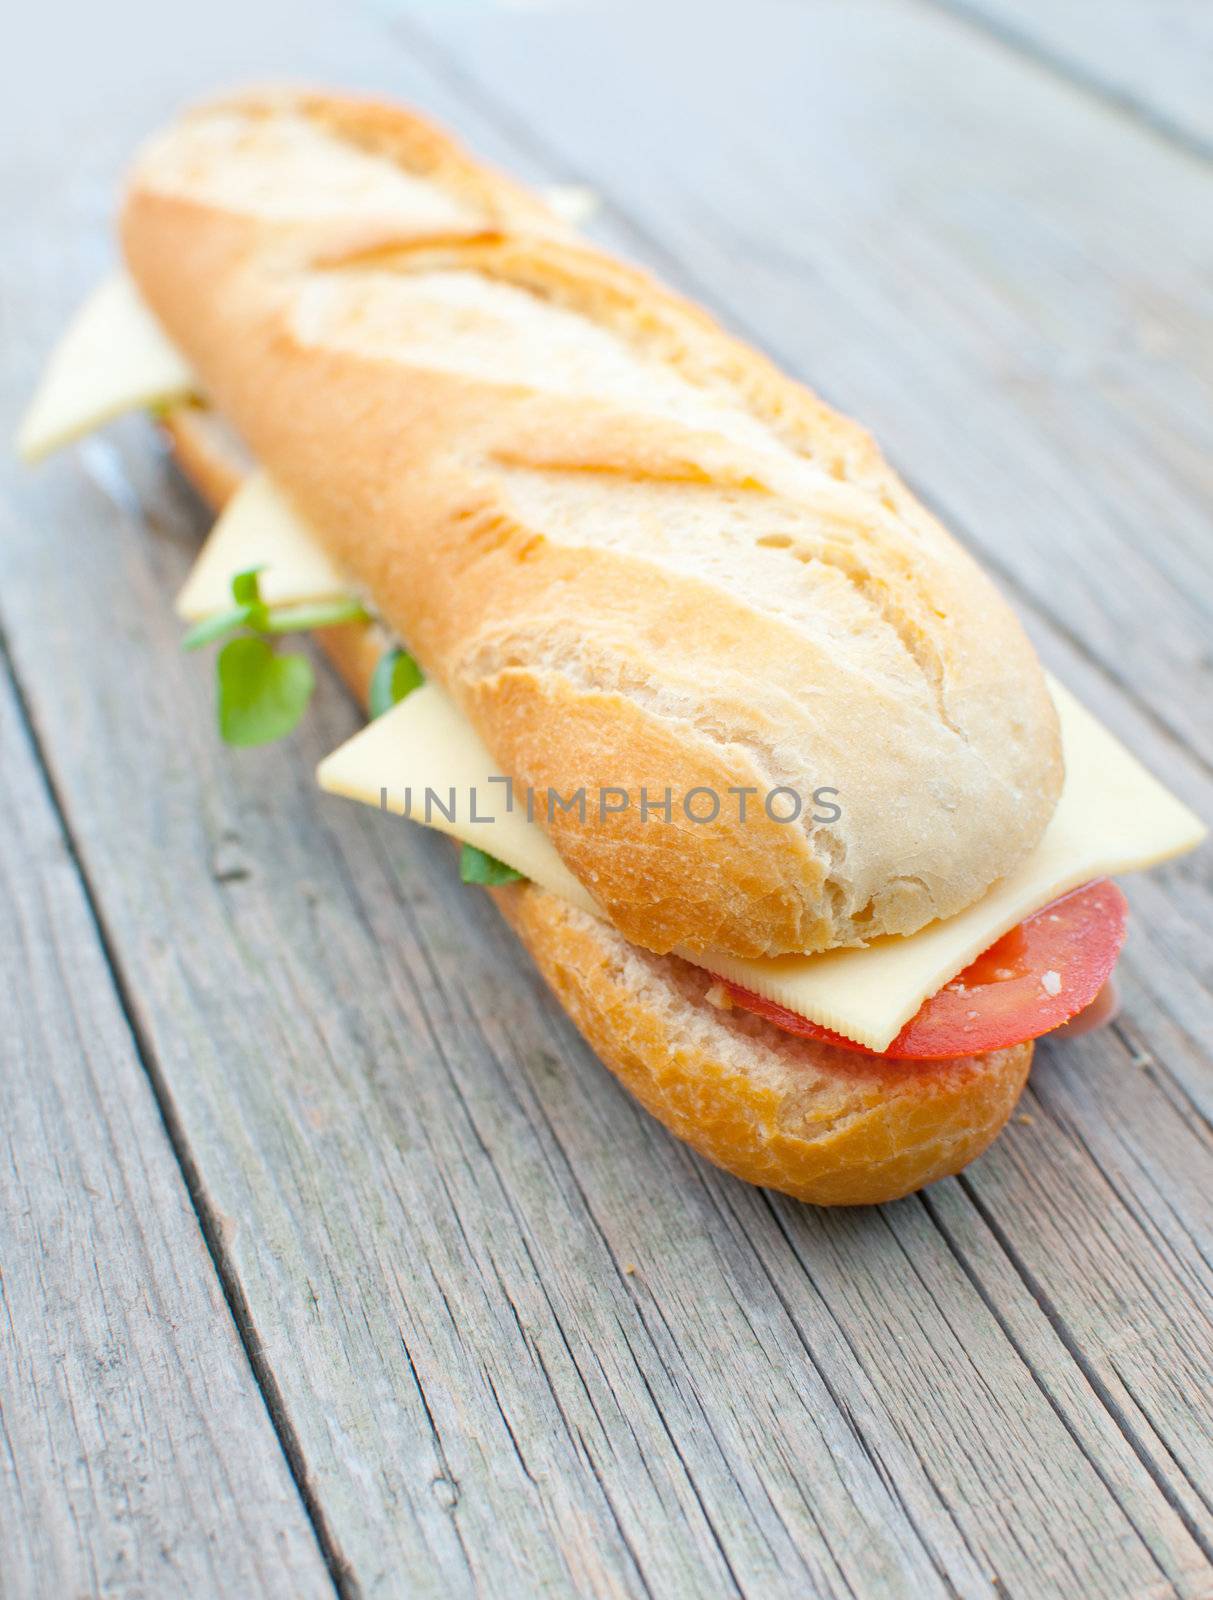 Large sub sandwich with ham and cheese